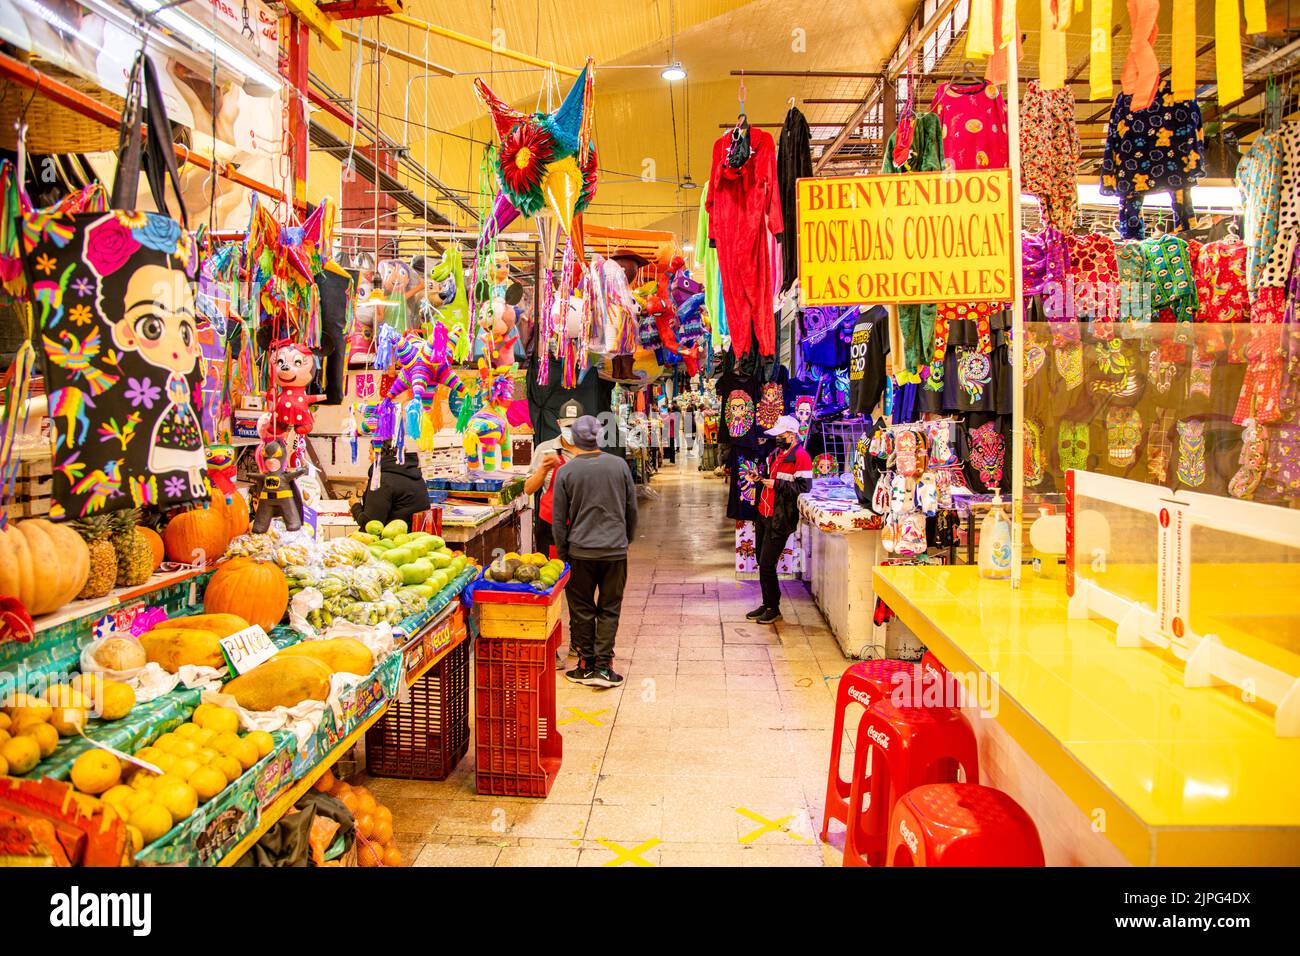 A various selection of produce at Coyoacan Market in Mexico City, Mexico Stock Photo